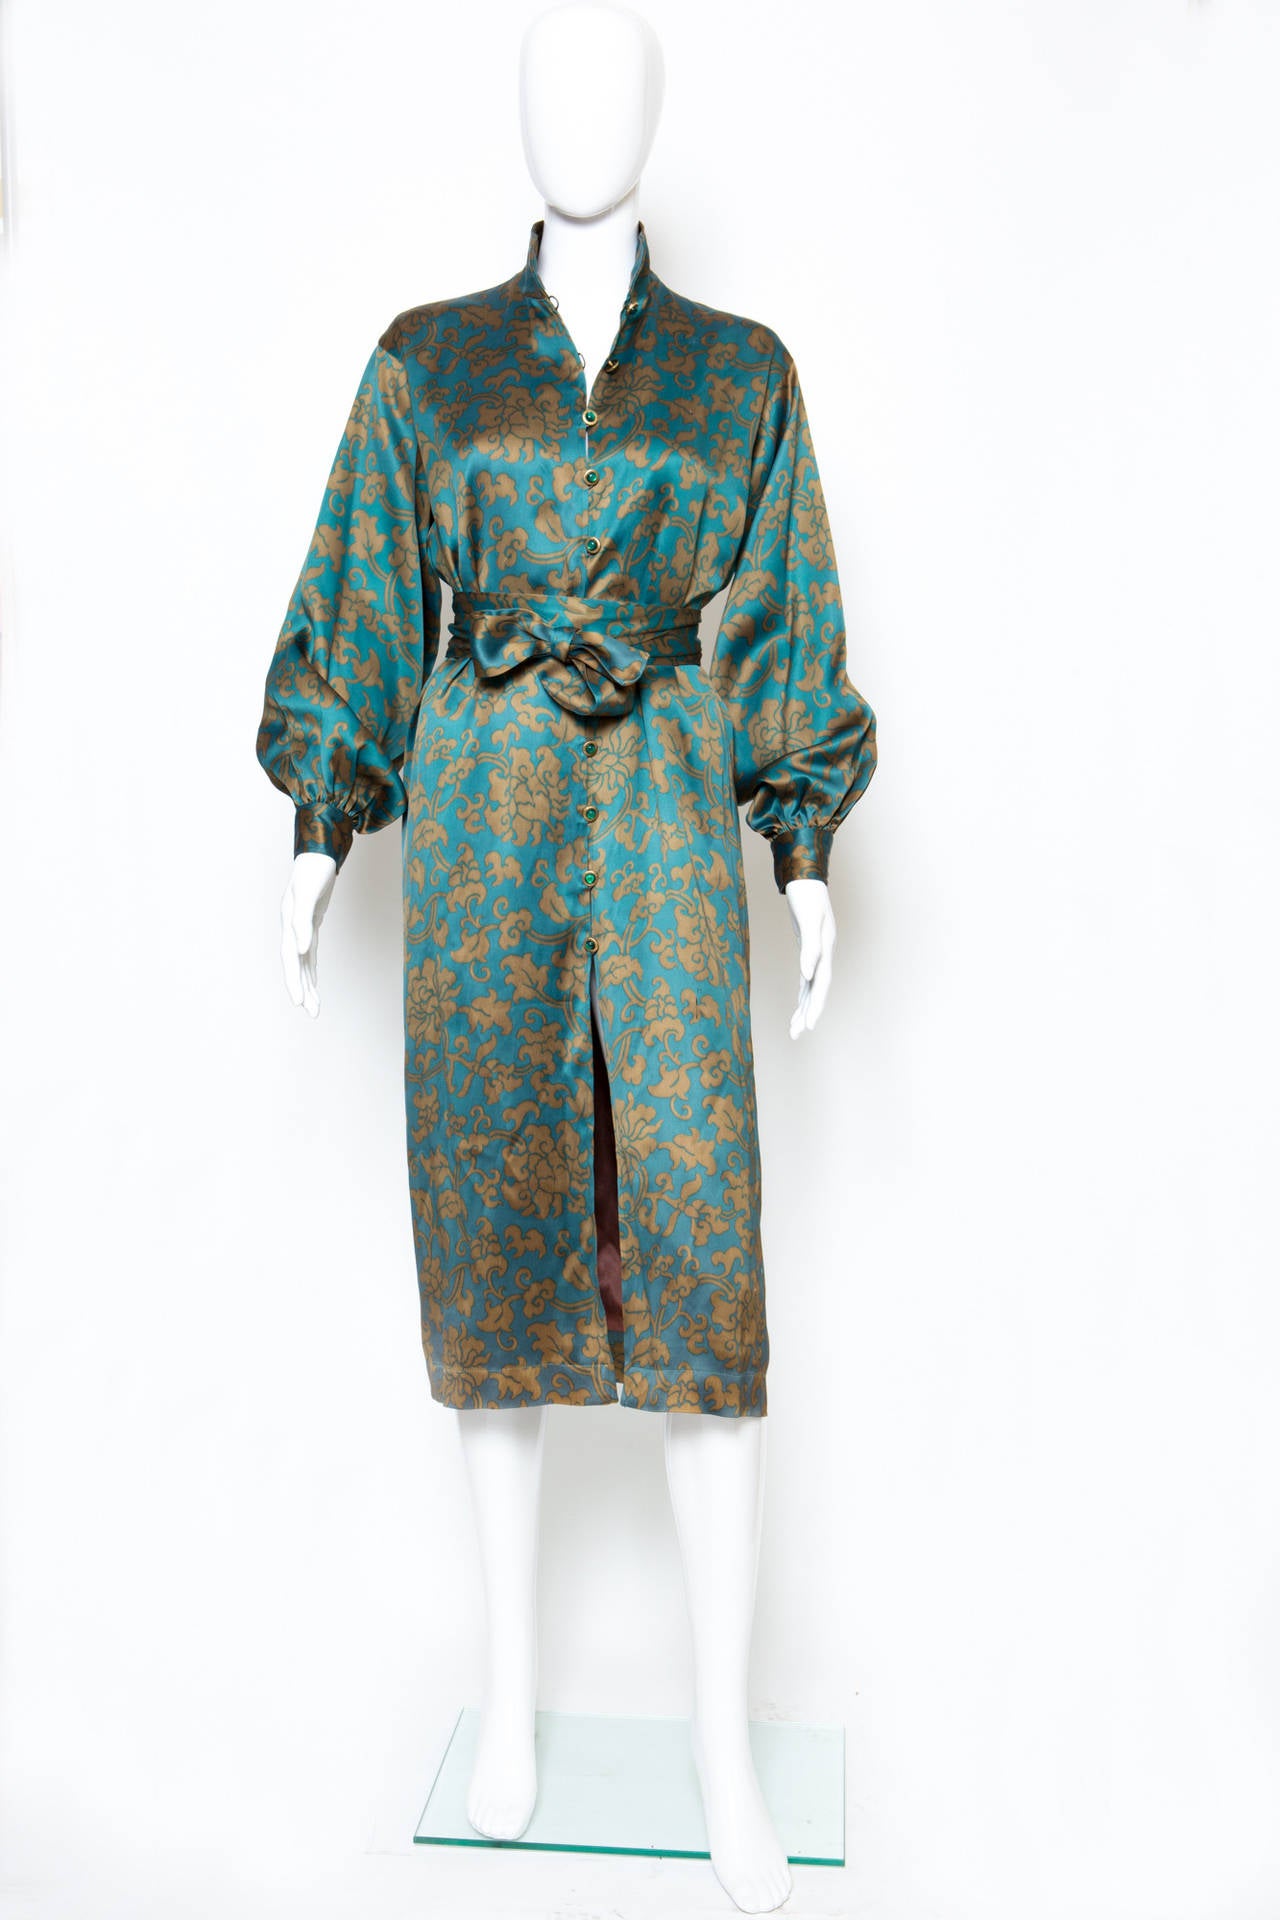 1978s Yves Saint Laurent printed silk satin dress fully front opening with fancy jewel buttons and loops, flouncy cuffs with two matching fancy jewel buttons. The dress has a fully brown silk lining, and a seperated belt: 197cm x  6cm.
Estimated